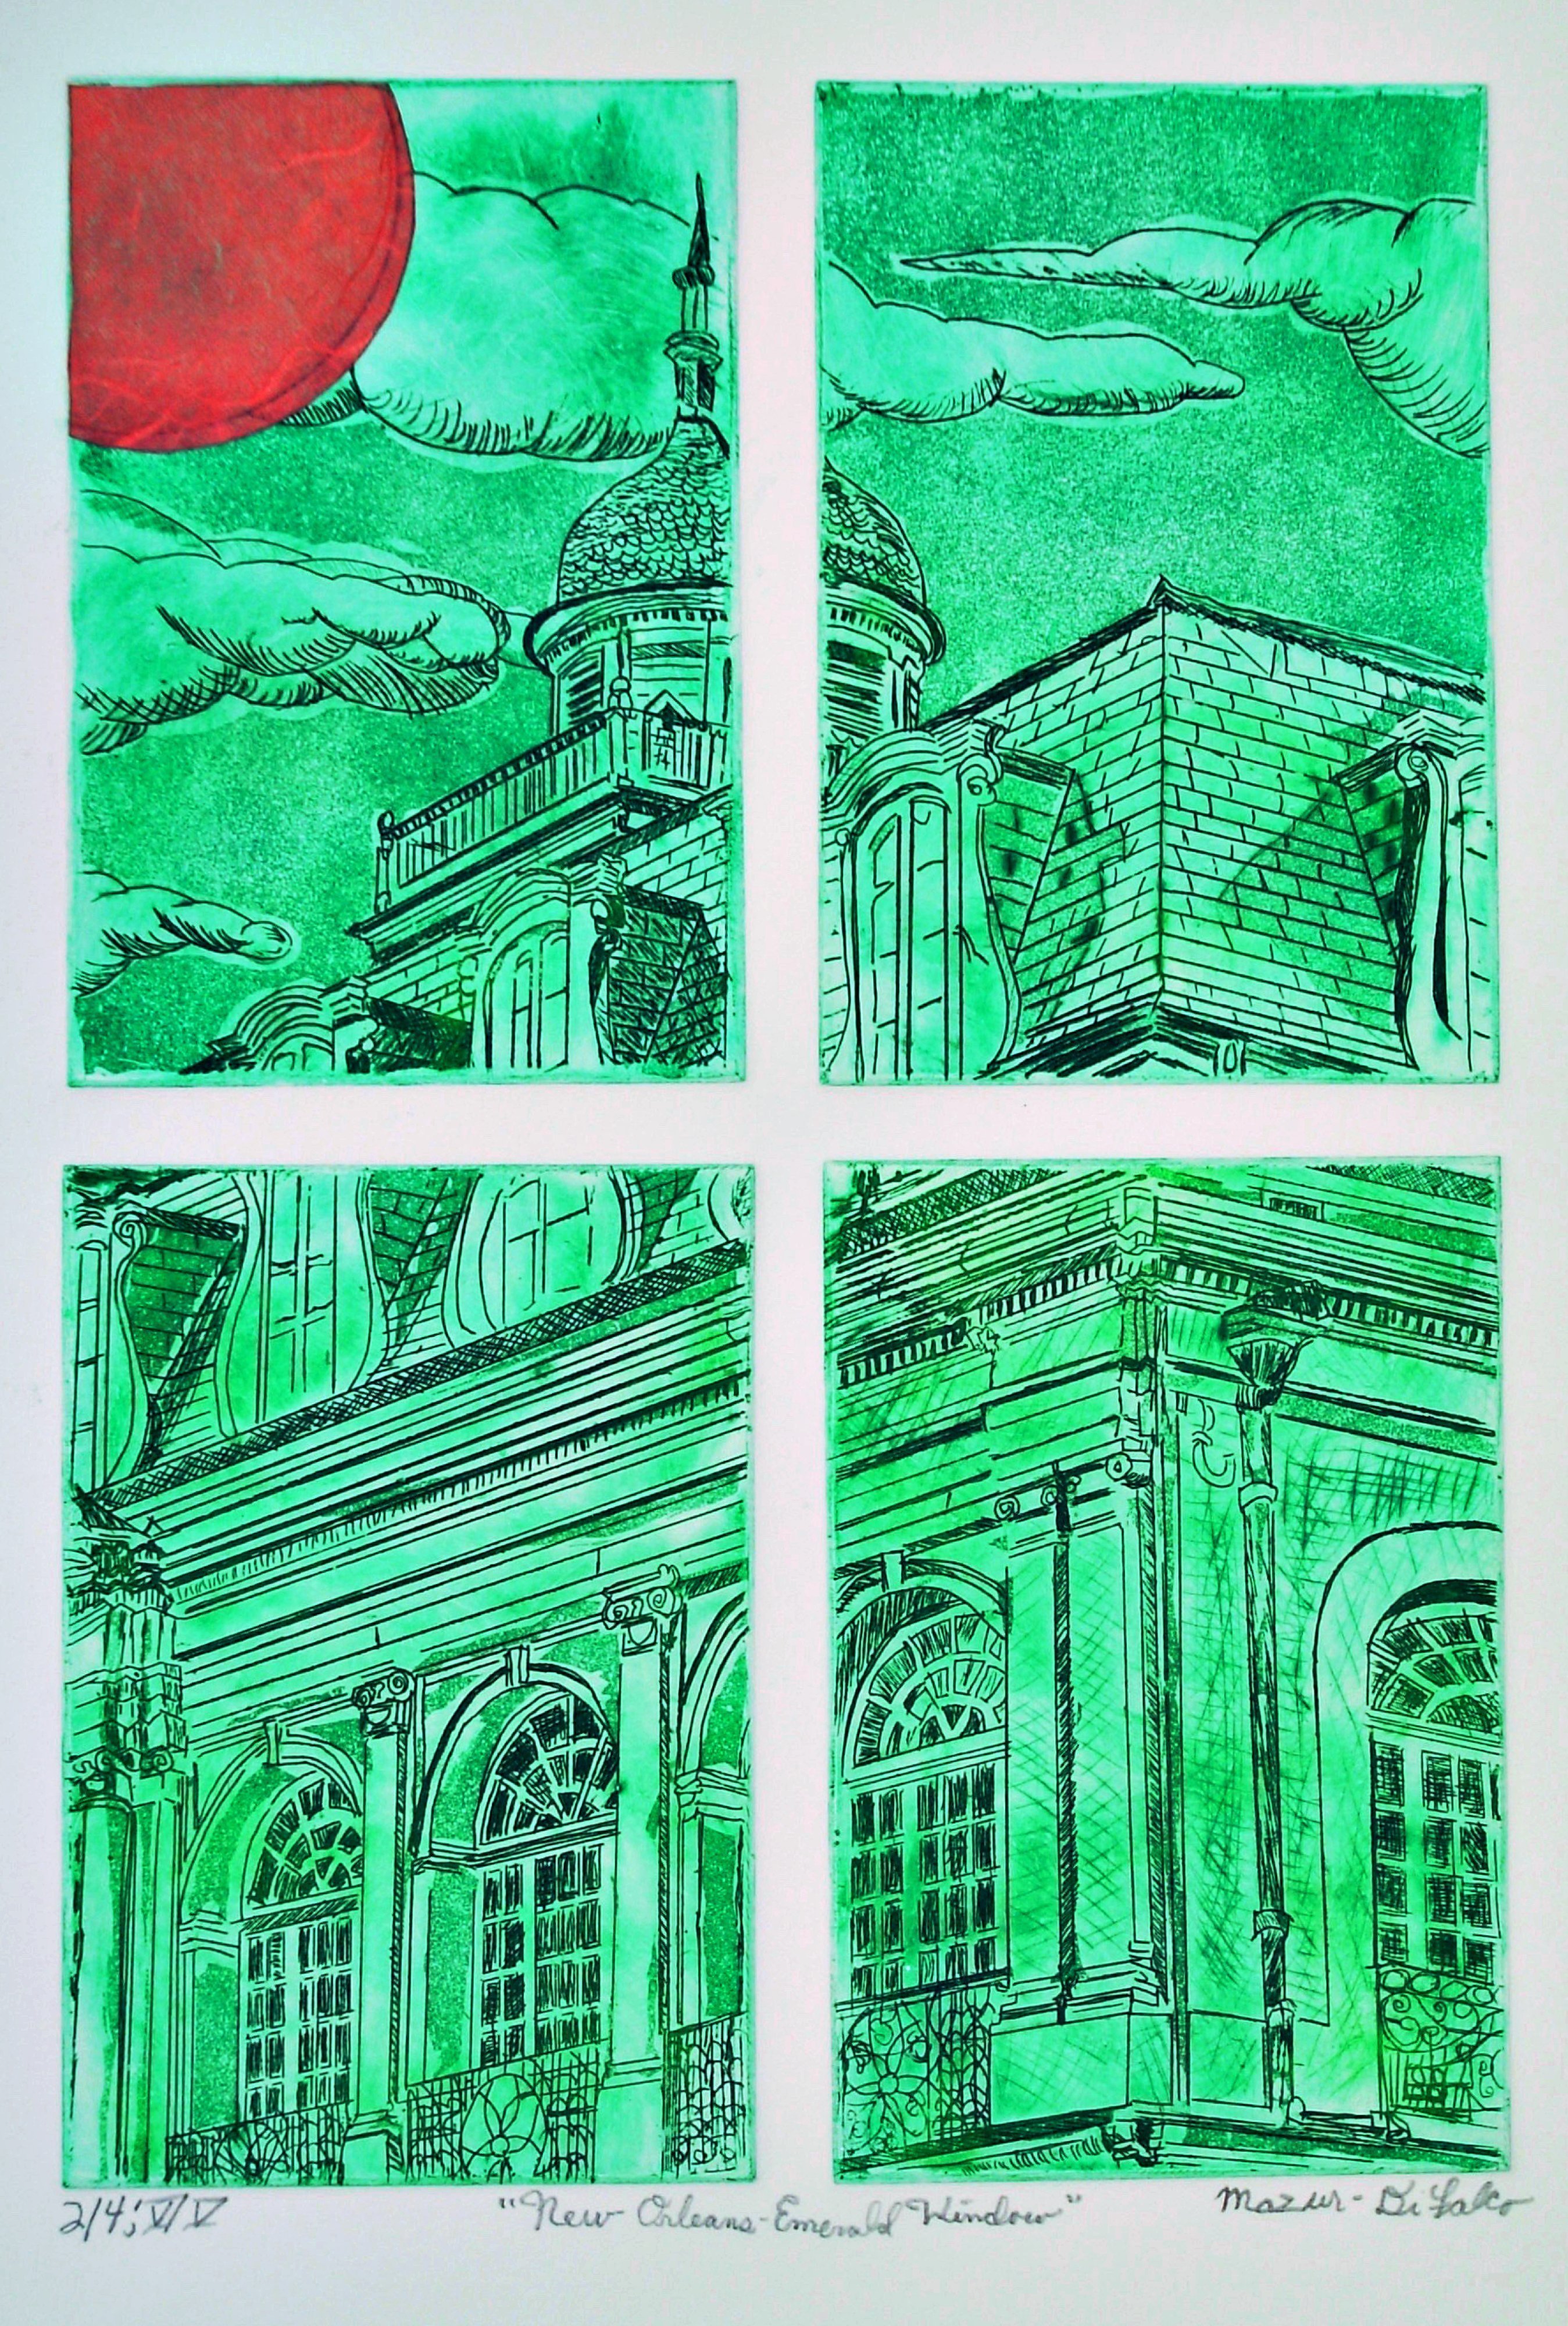 Jerry  Di Falco: 'new orleans emerald window', 2019 Intaglio, Architecture. Jerry Mazur- DiFalco created this distinctive etching via the employment of four separate zinc plates, which were placed simultaneously on the printing press bedaEUR